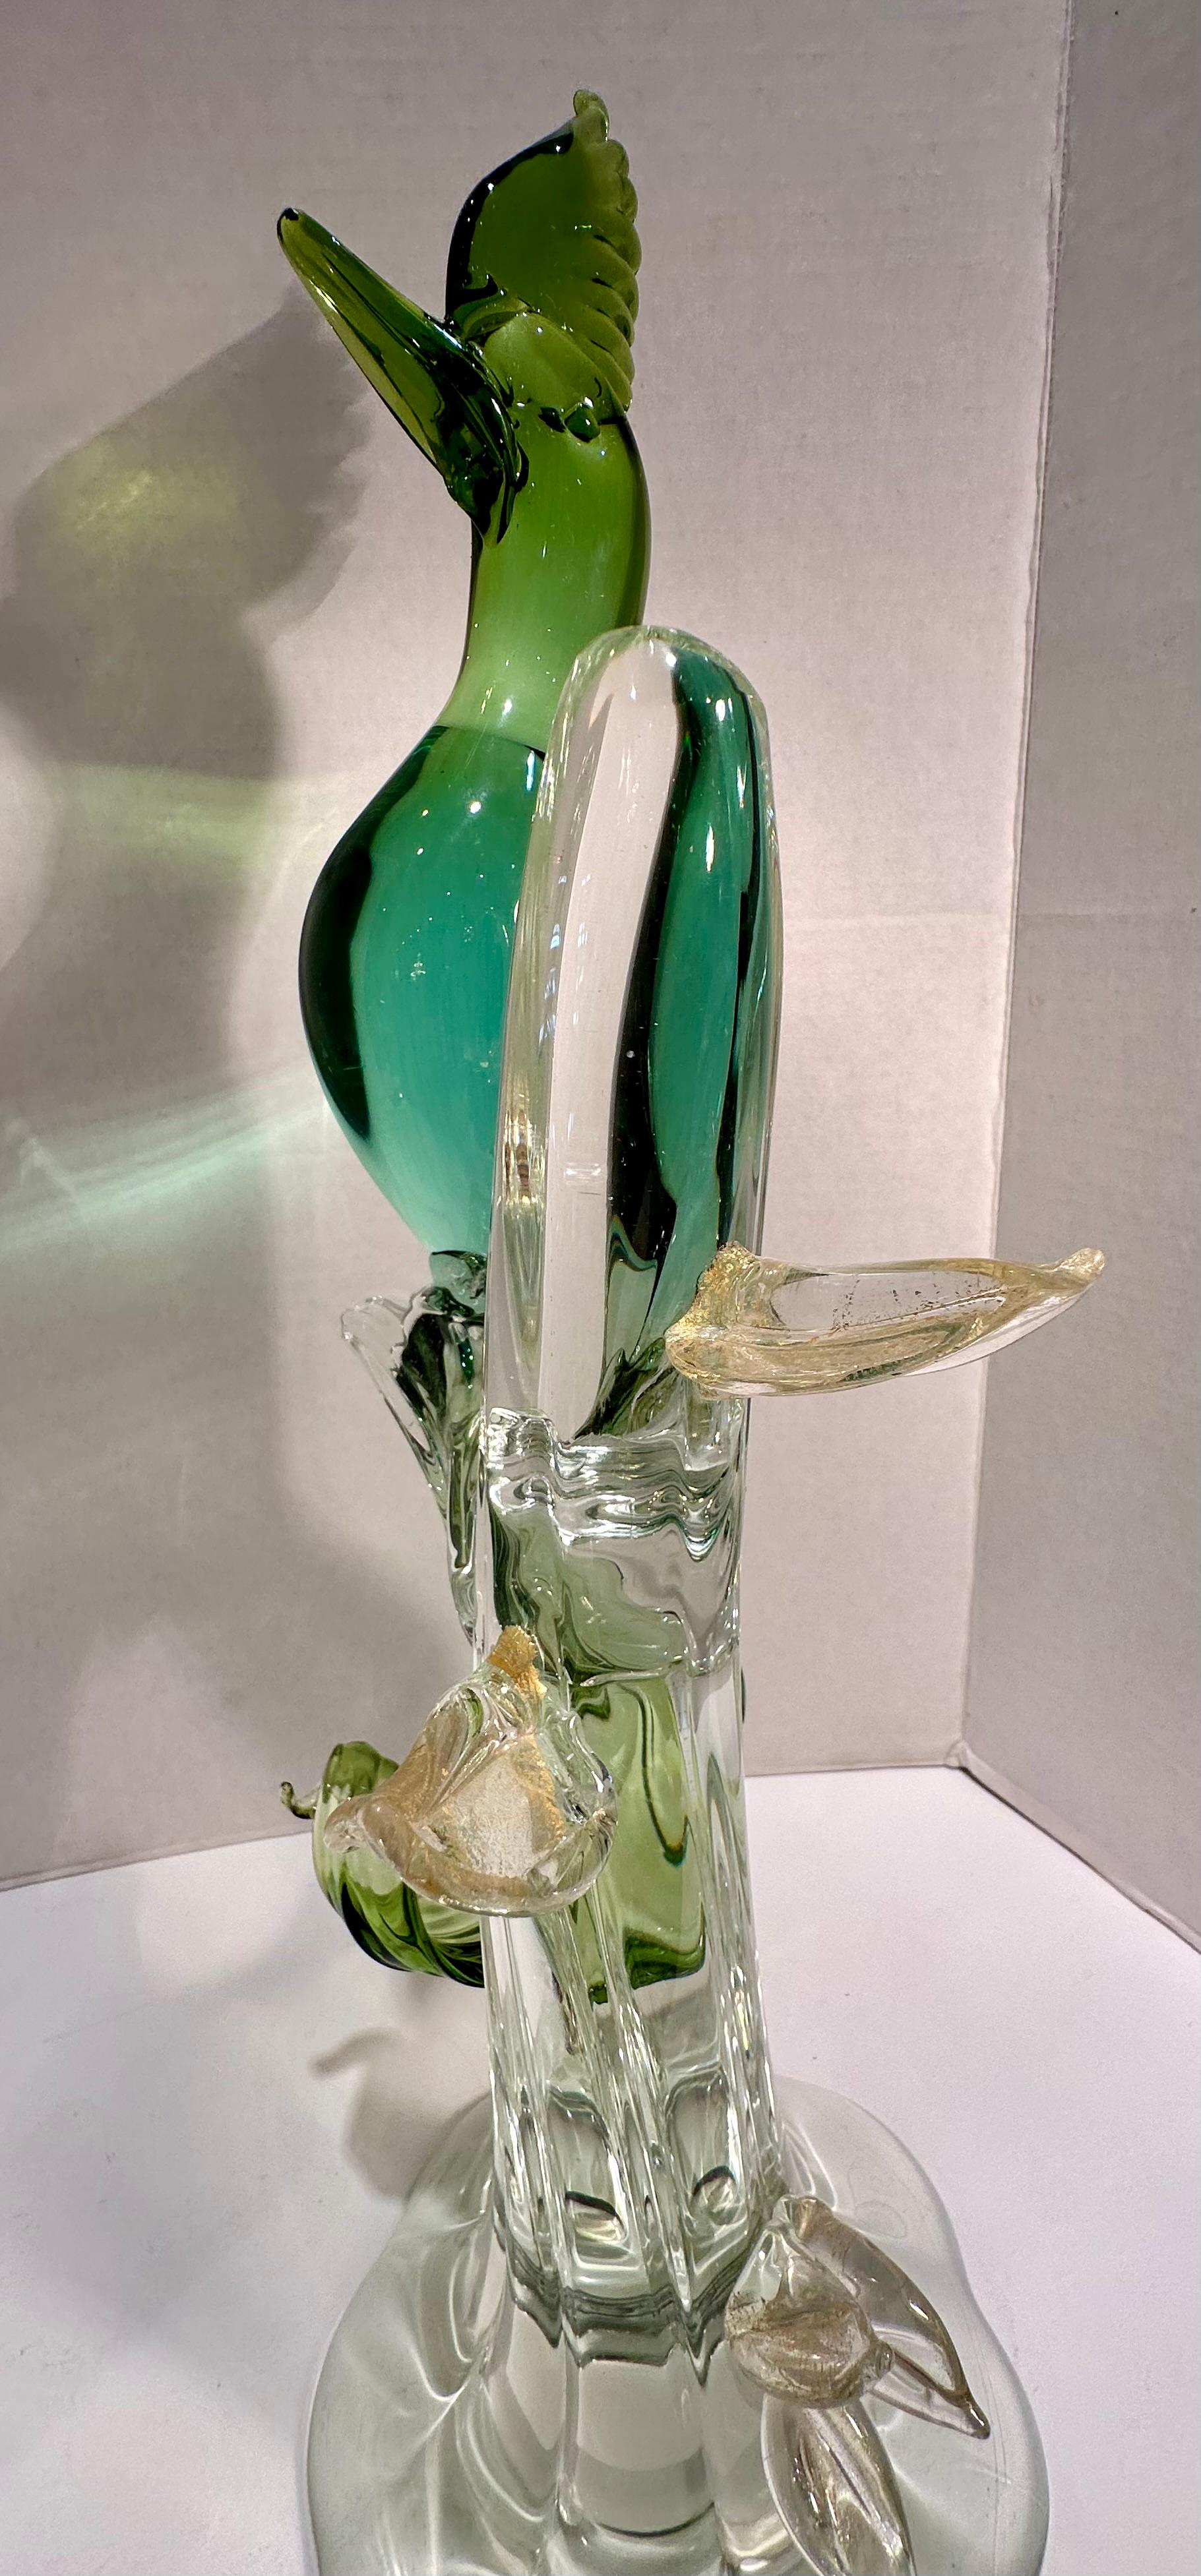  Large Salviati Italy Murano Glass Exotic Bird Figurine in Shades of Green  In Good Condition For Sale In Tustin, CA